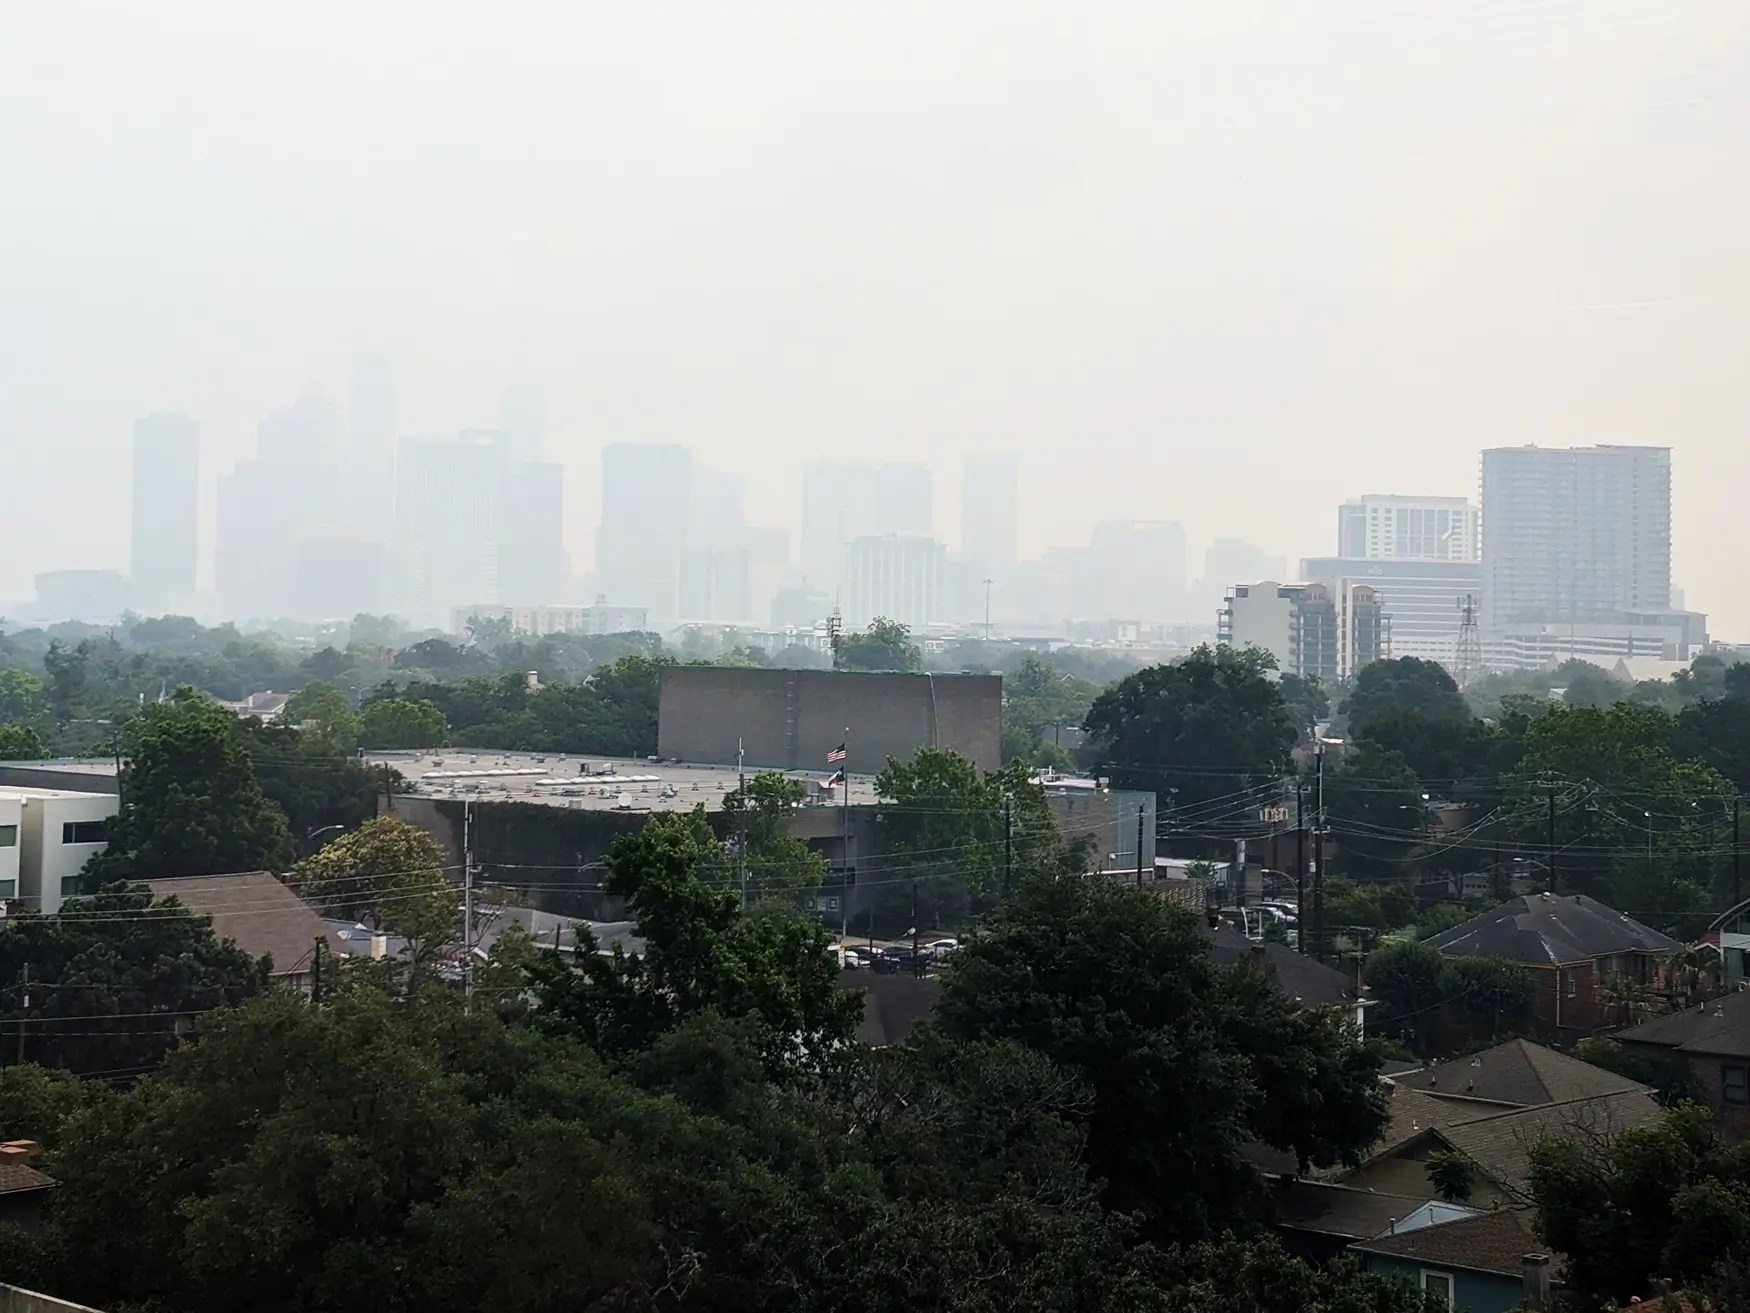 Wondering why it’s been so hazy in the Houston area this week? Here’s what to know.